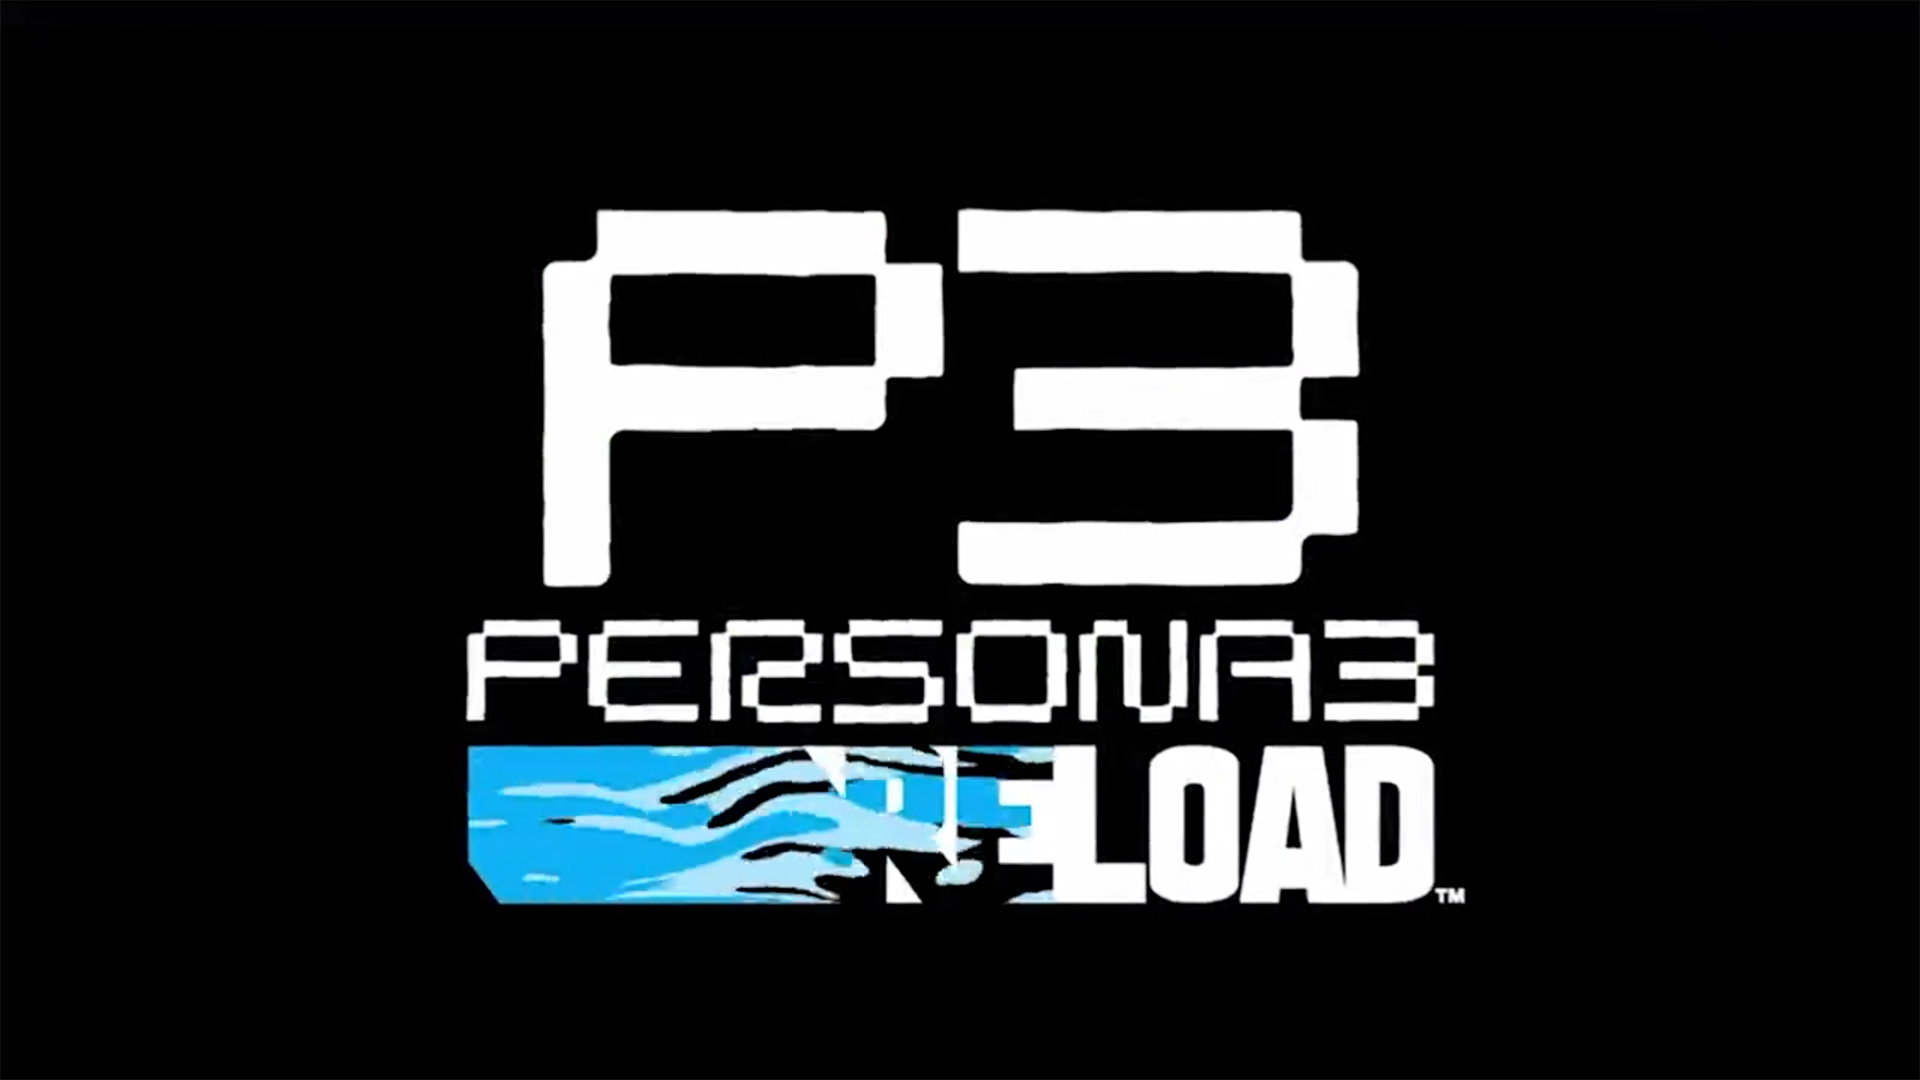 Persona 3 Reload is a highly anticipated remake and is set to arrive early 2024